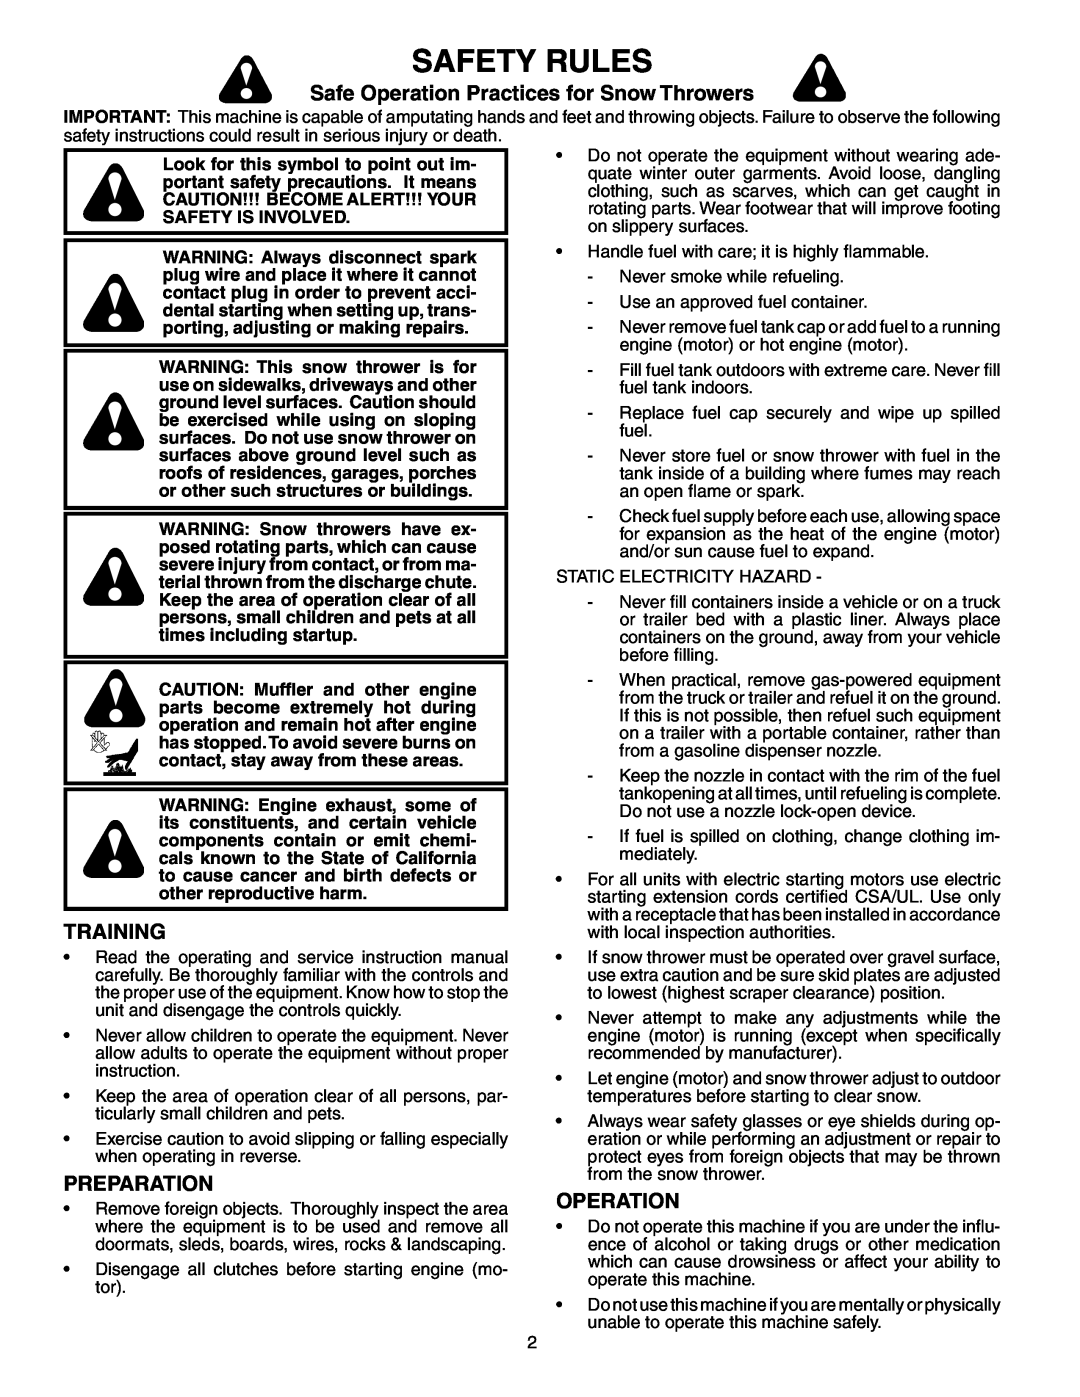 Poulan 192034 owner manual Safety Rules, Safe Operation Practices for Snow Throwers, Training, Preparation 